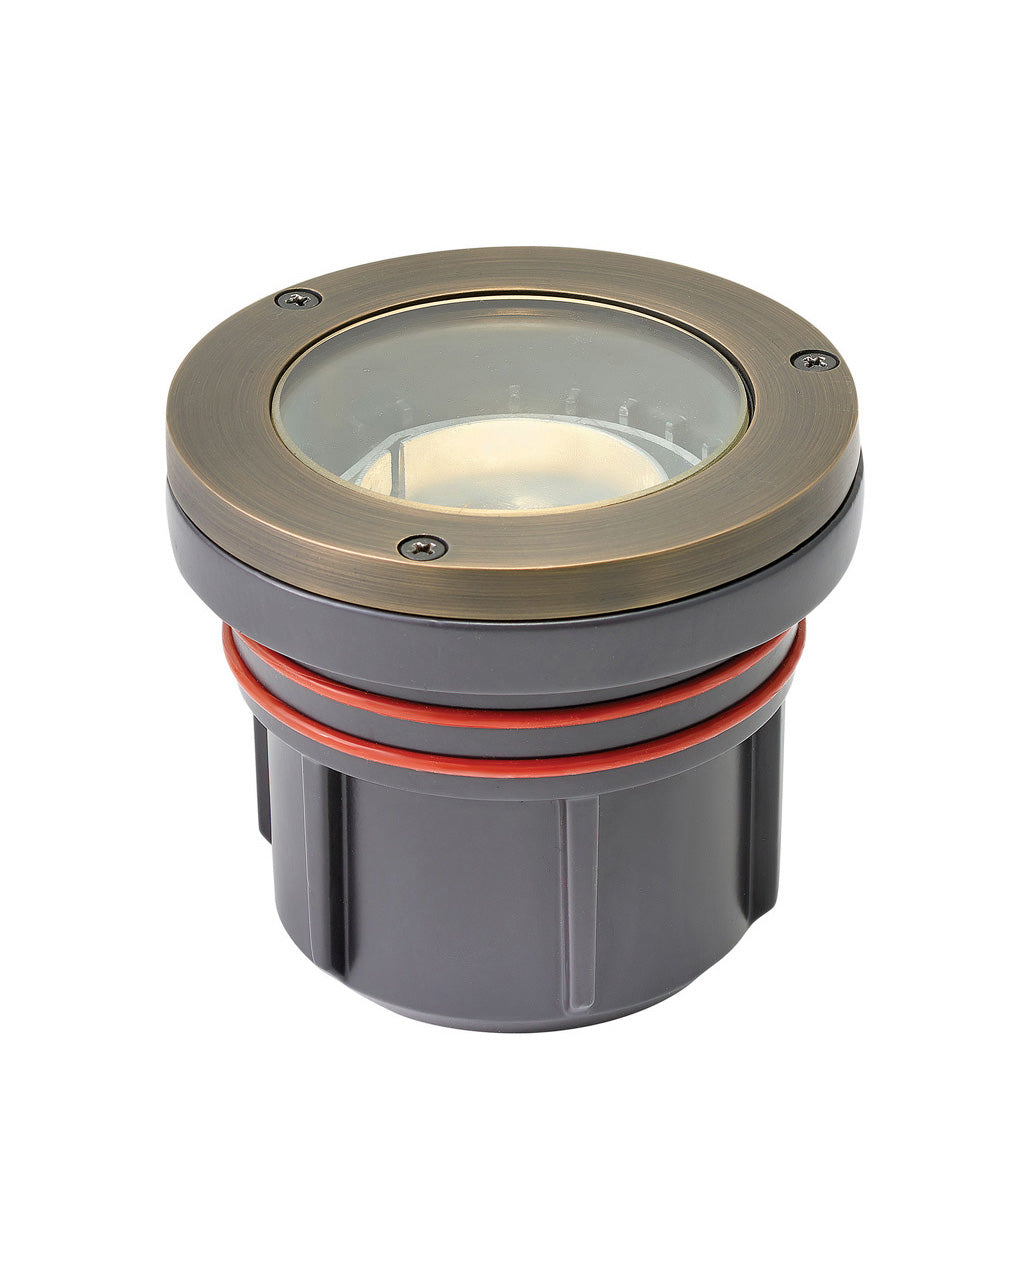 Hinkley  Flat Top Well Light Outdoor l Wall Hinkley   